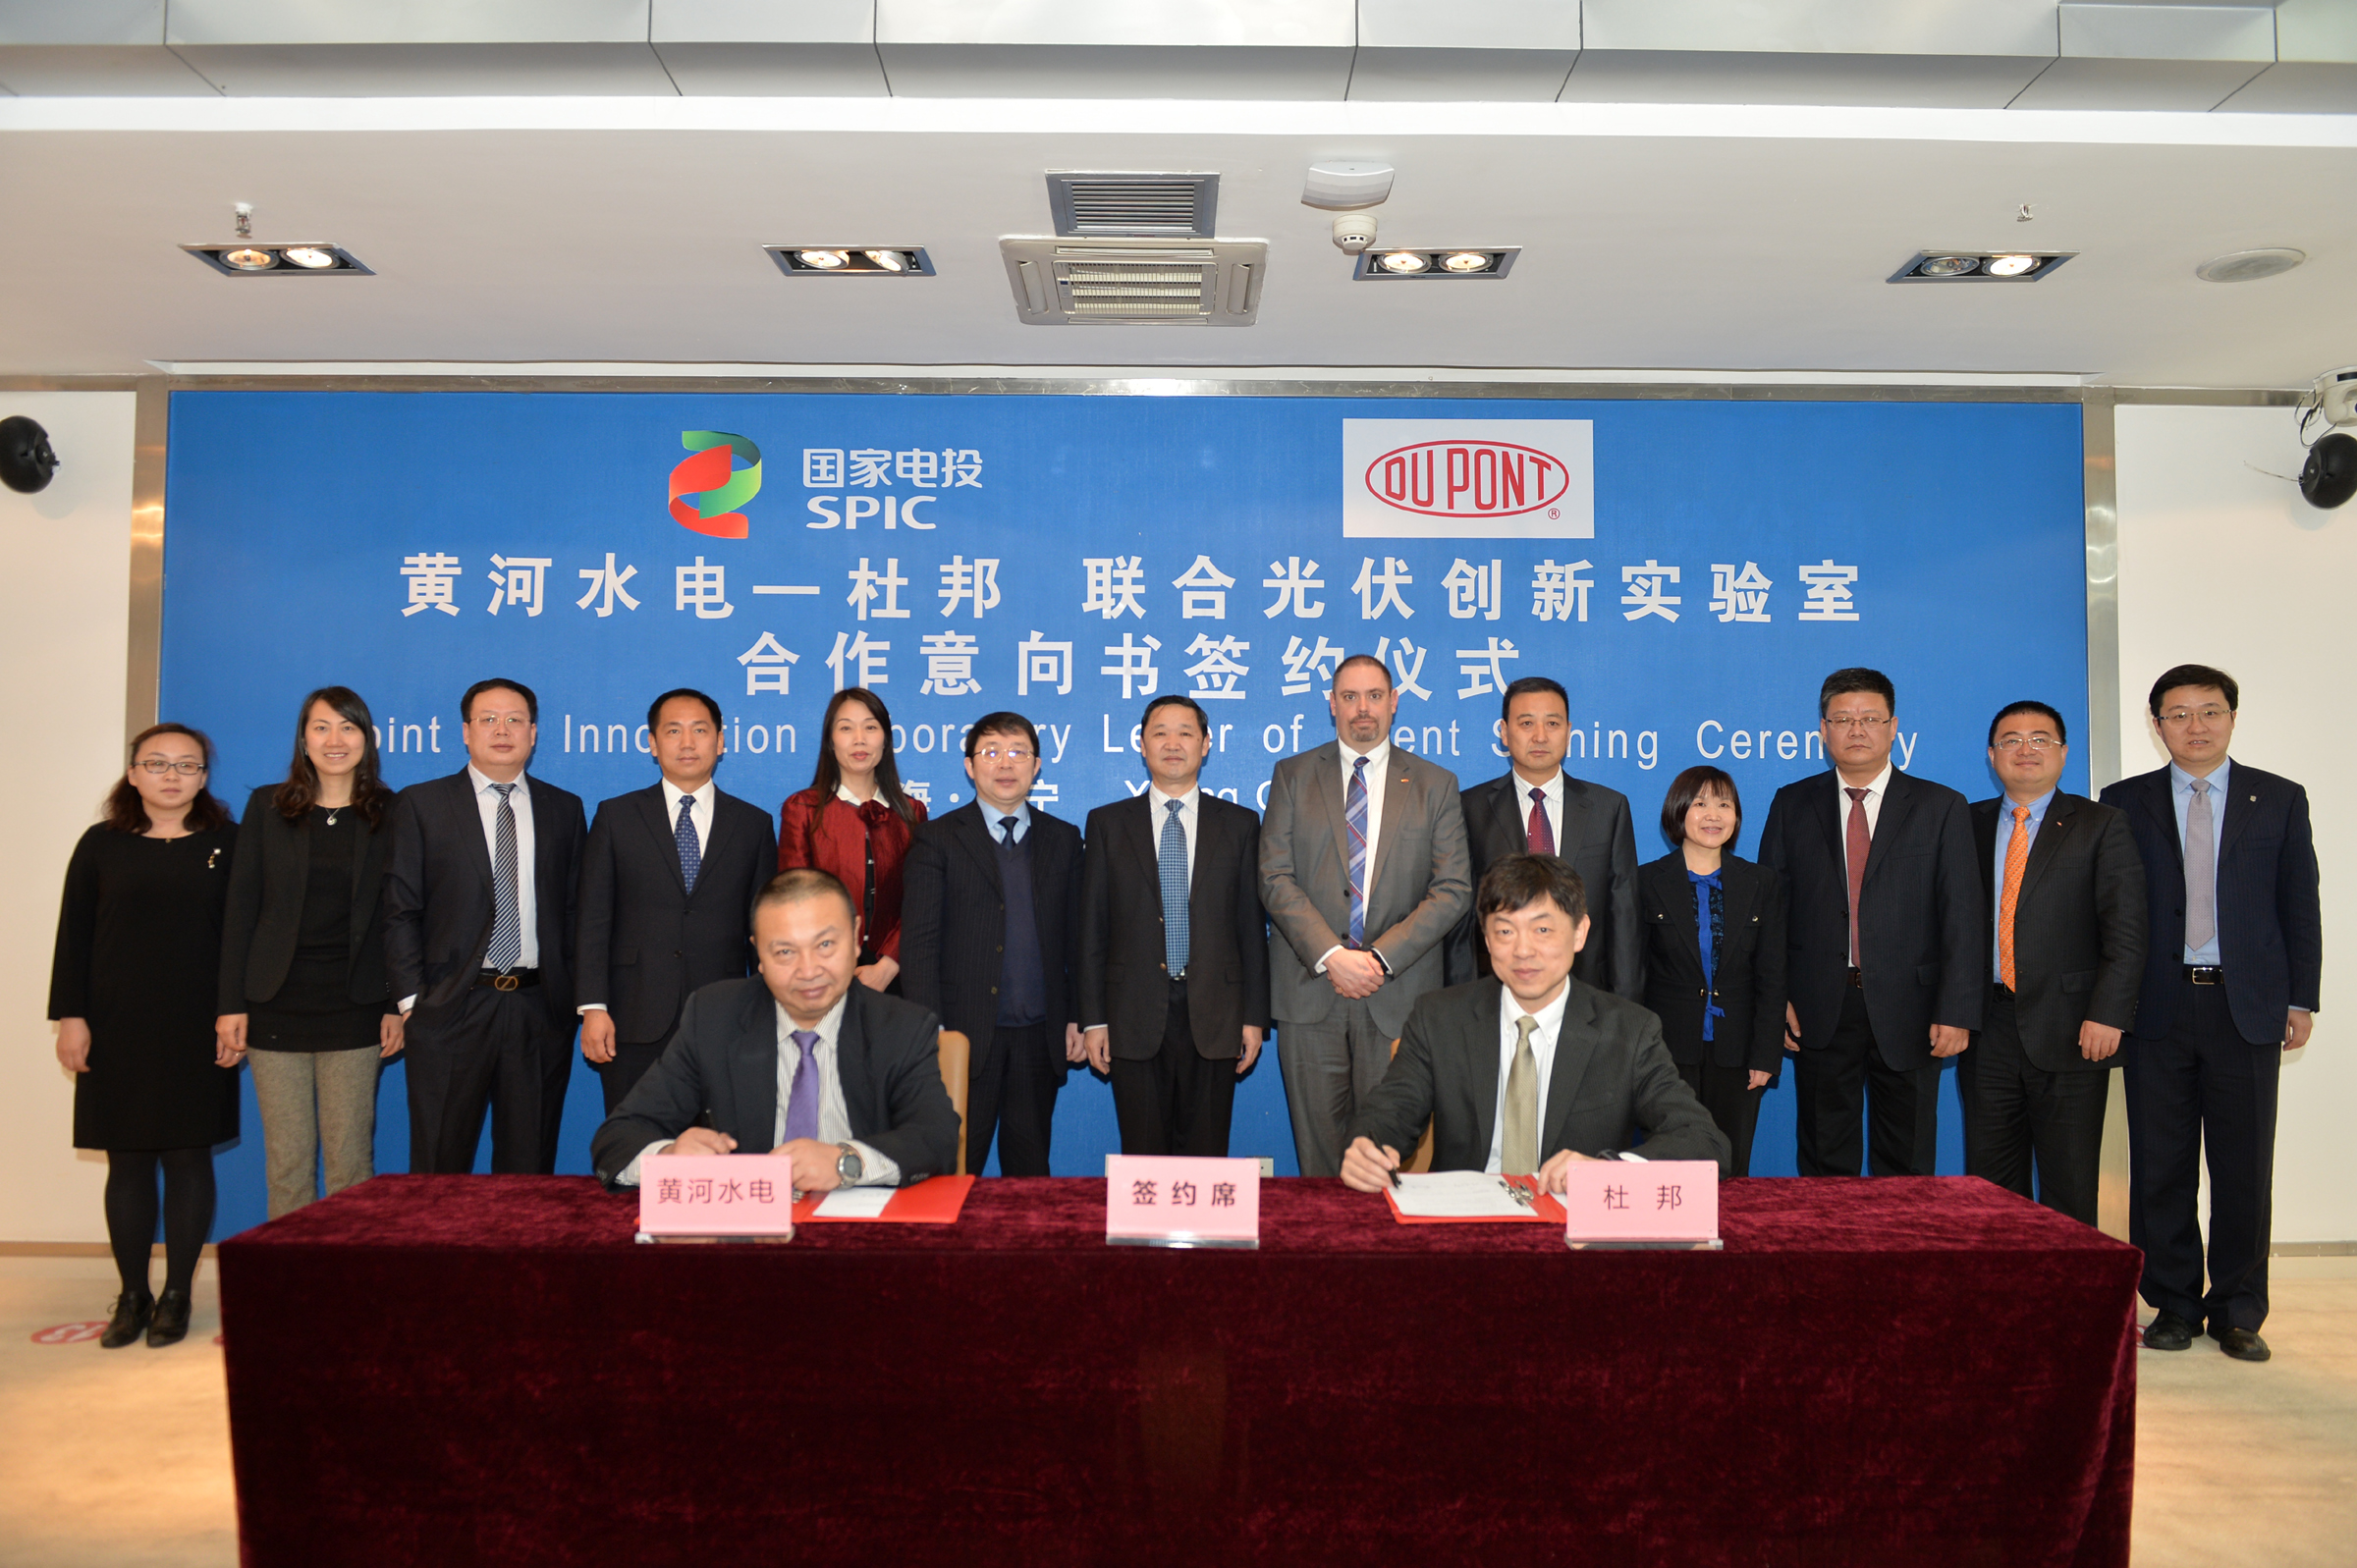 DuPont Electronics & Communications and SPIC Huanghe Hydropower Sign Strategic Collaboration Letter of Intent